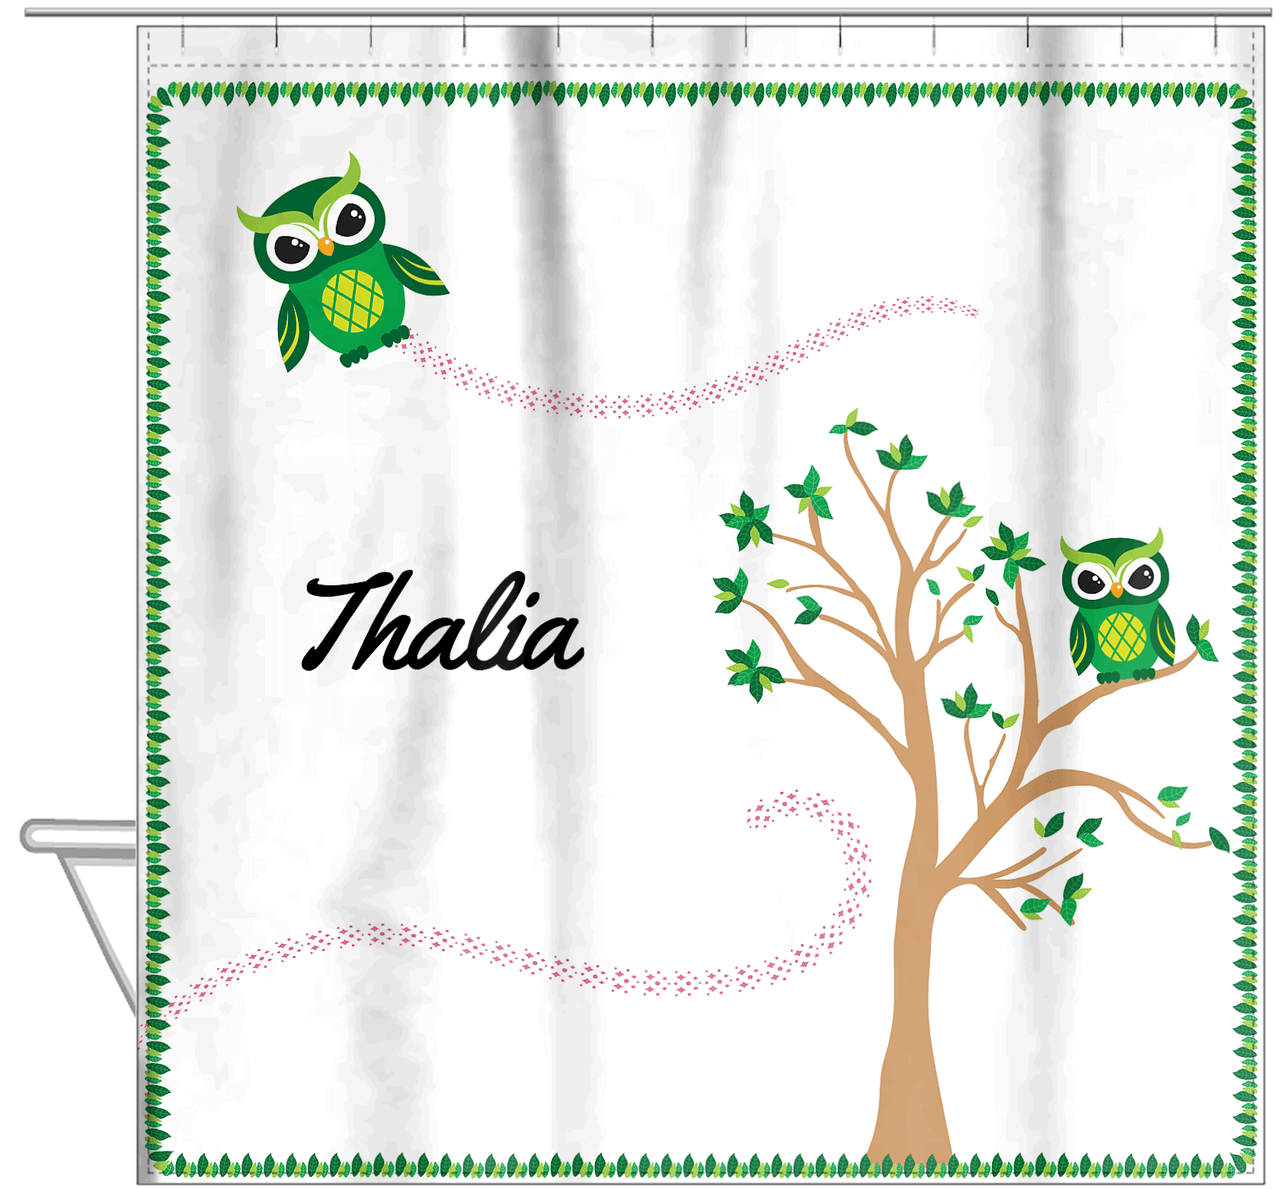 Personalized Owl Shower Curtain VII - Owl 03 - White Background - Hanging View